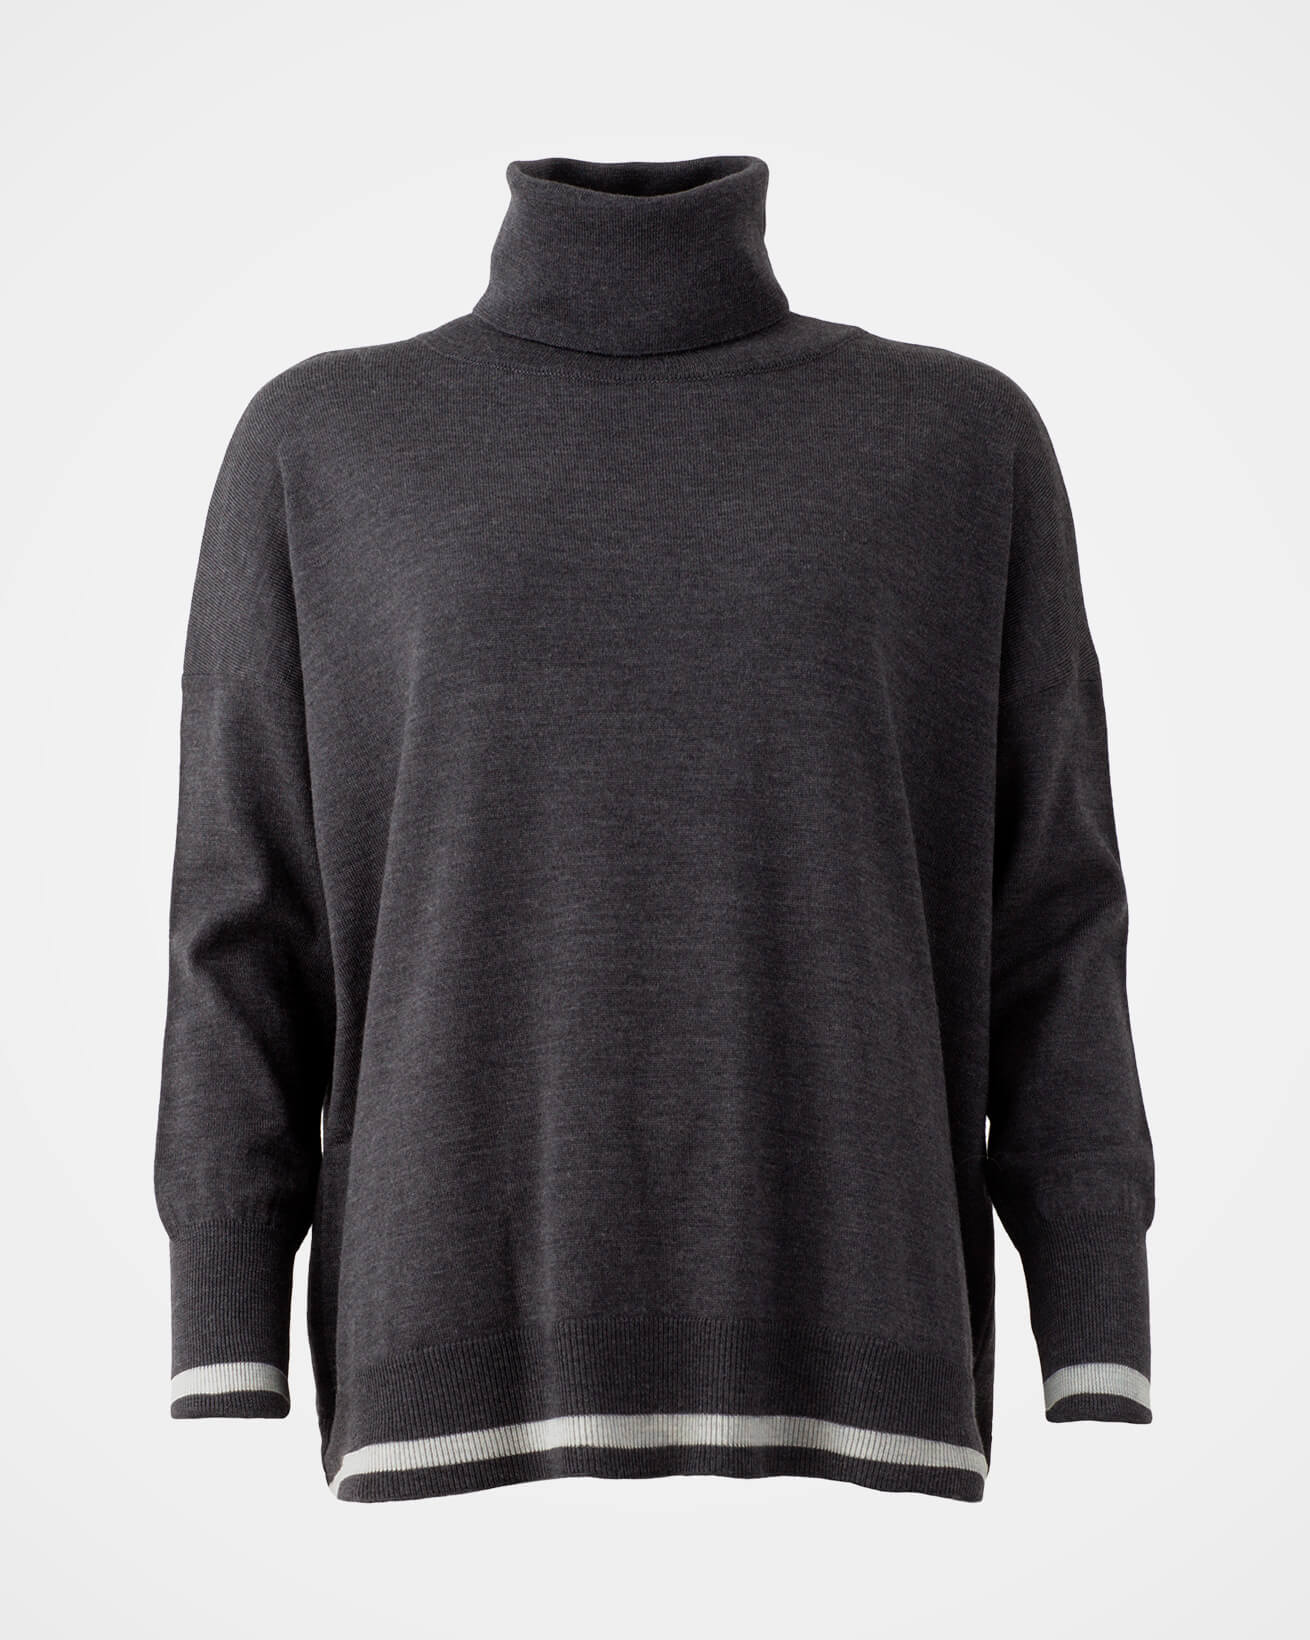 7401_slouchy-merino-rollneck_charcoal-tipped_front_web.jpg